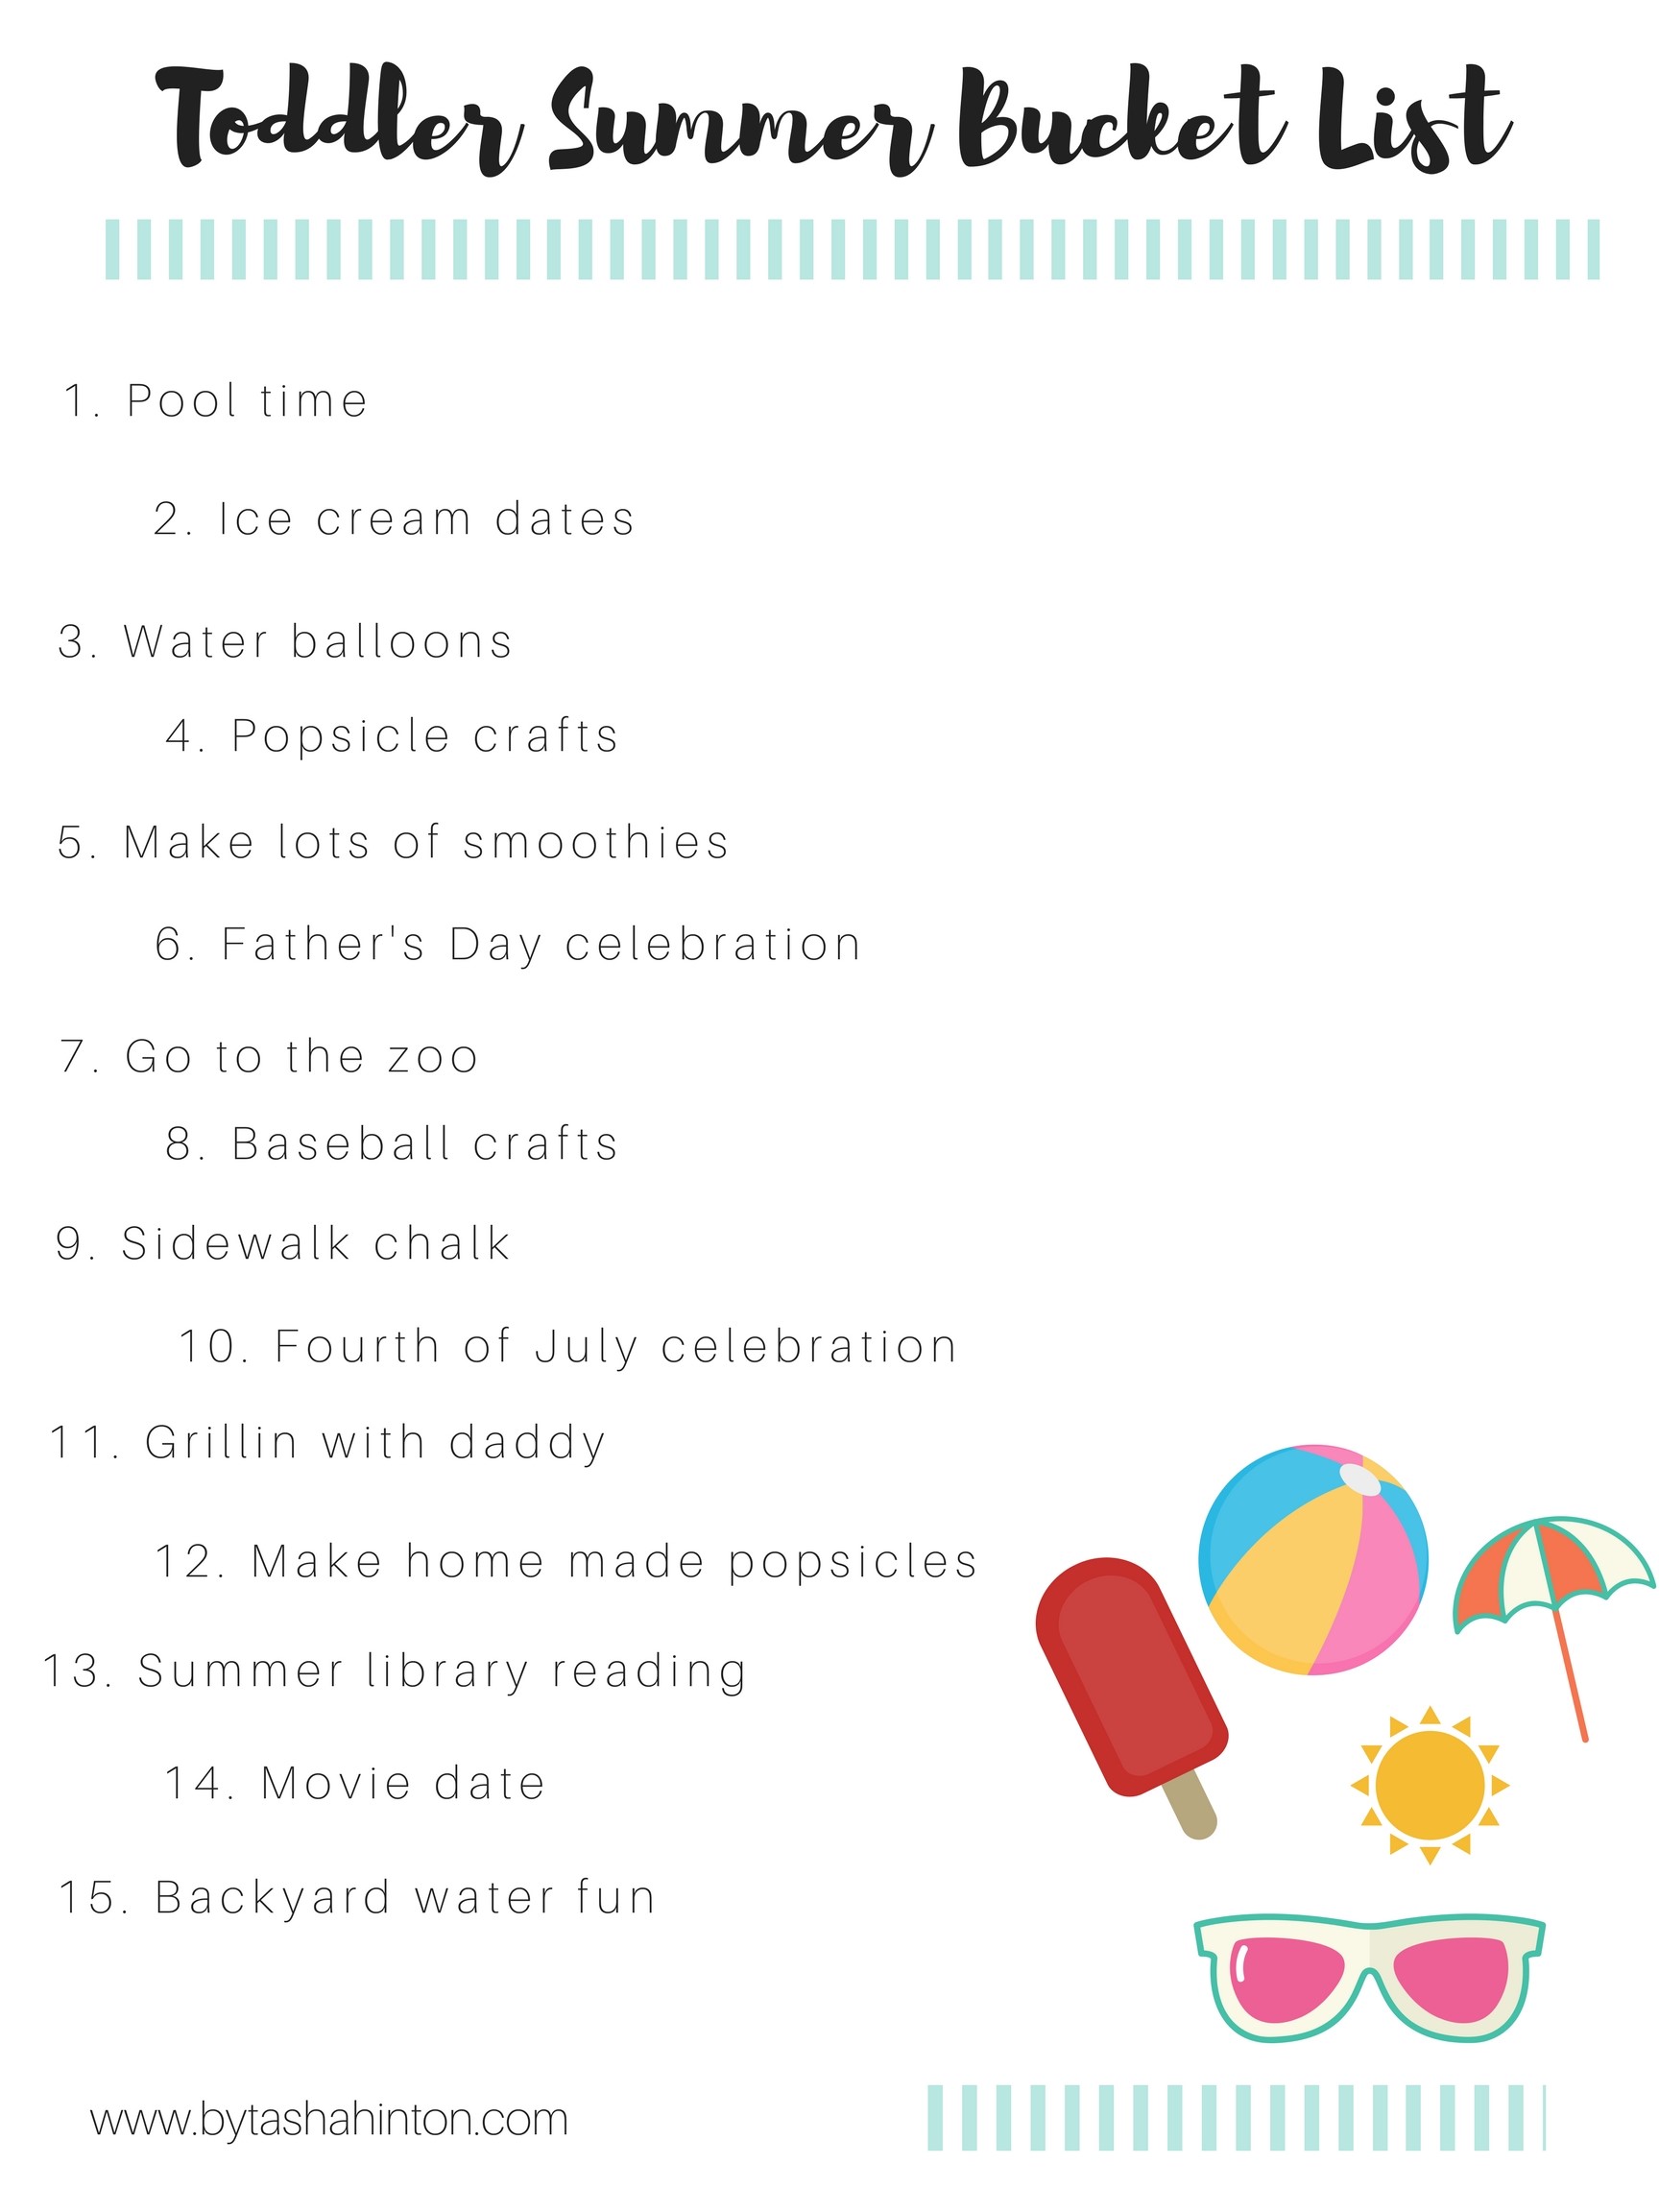 Activities to do with your toddler this summer